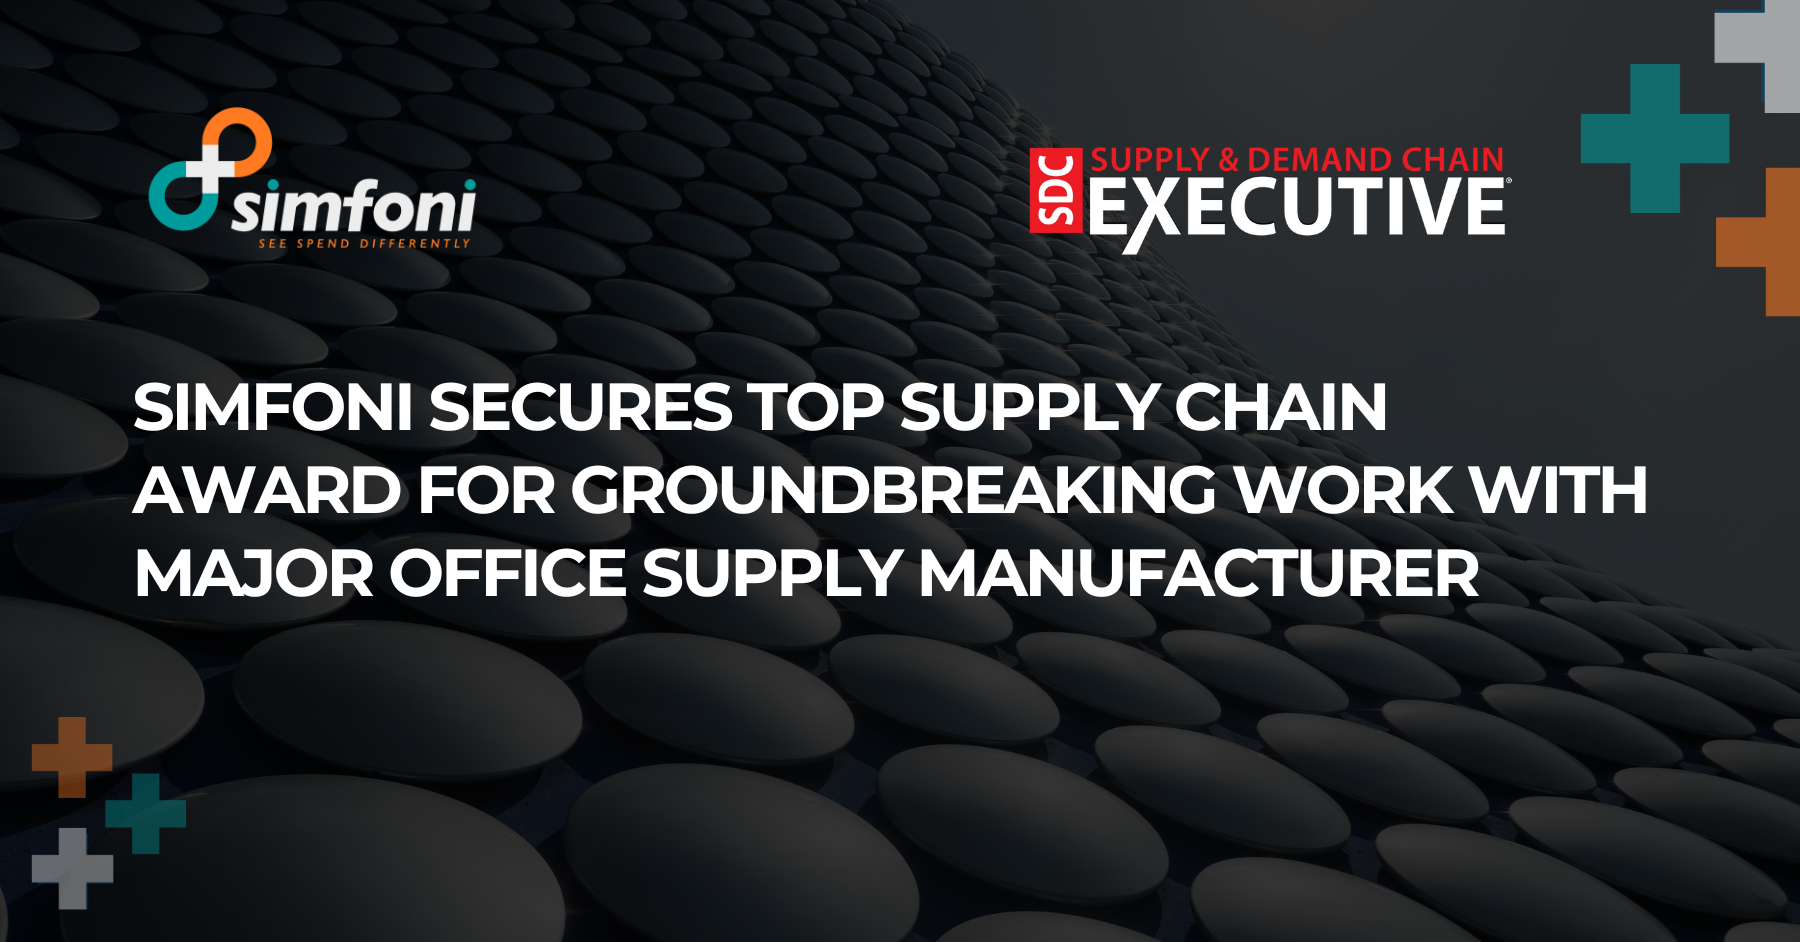 Simfoni Secures Top Supply Chain Award for Groundbreaking Work with Major Office Supply Manufacturer